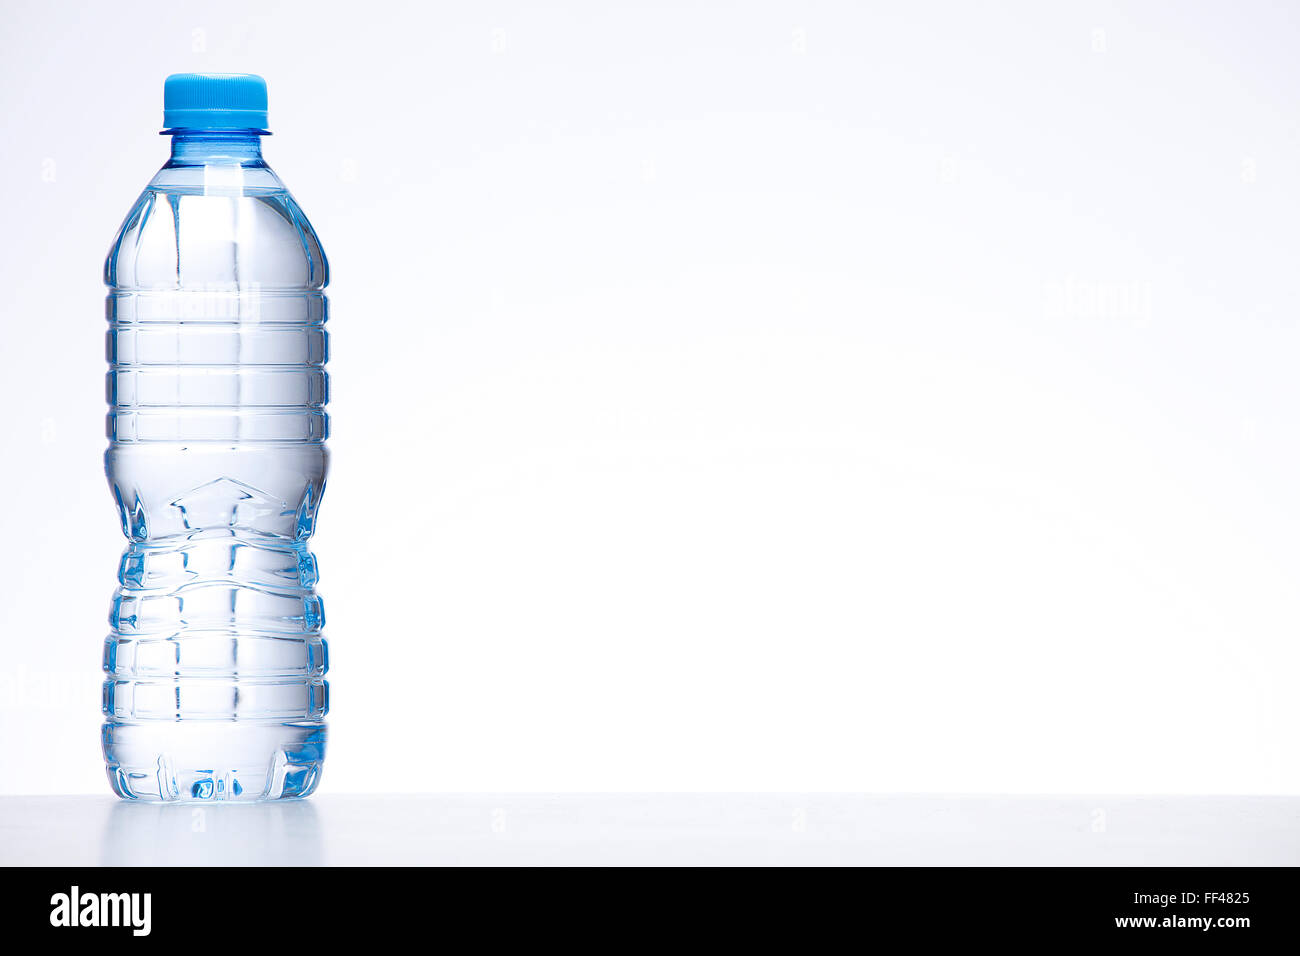 https://c8.alamy.com/comp/FF4825/blue-bottle-of-water-on-white-background-FF4825.jpg